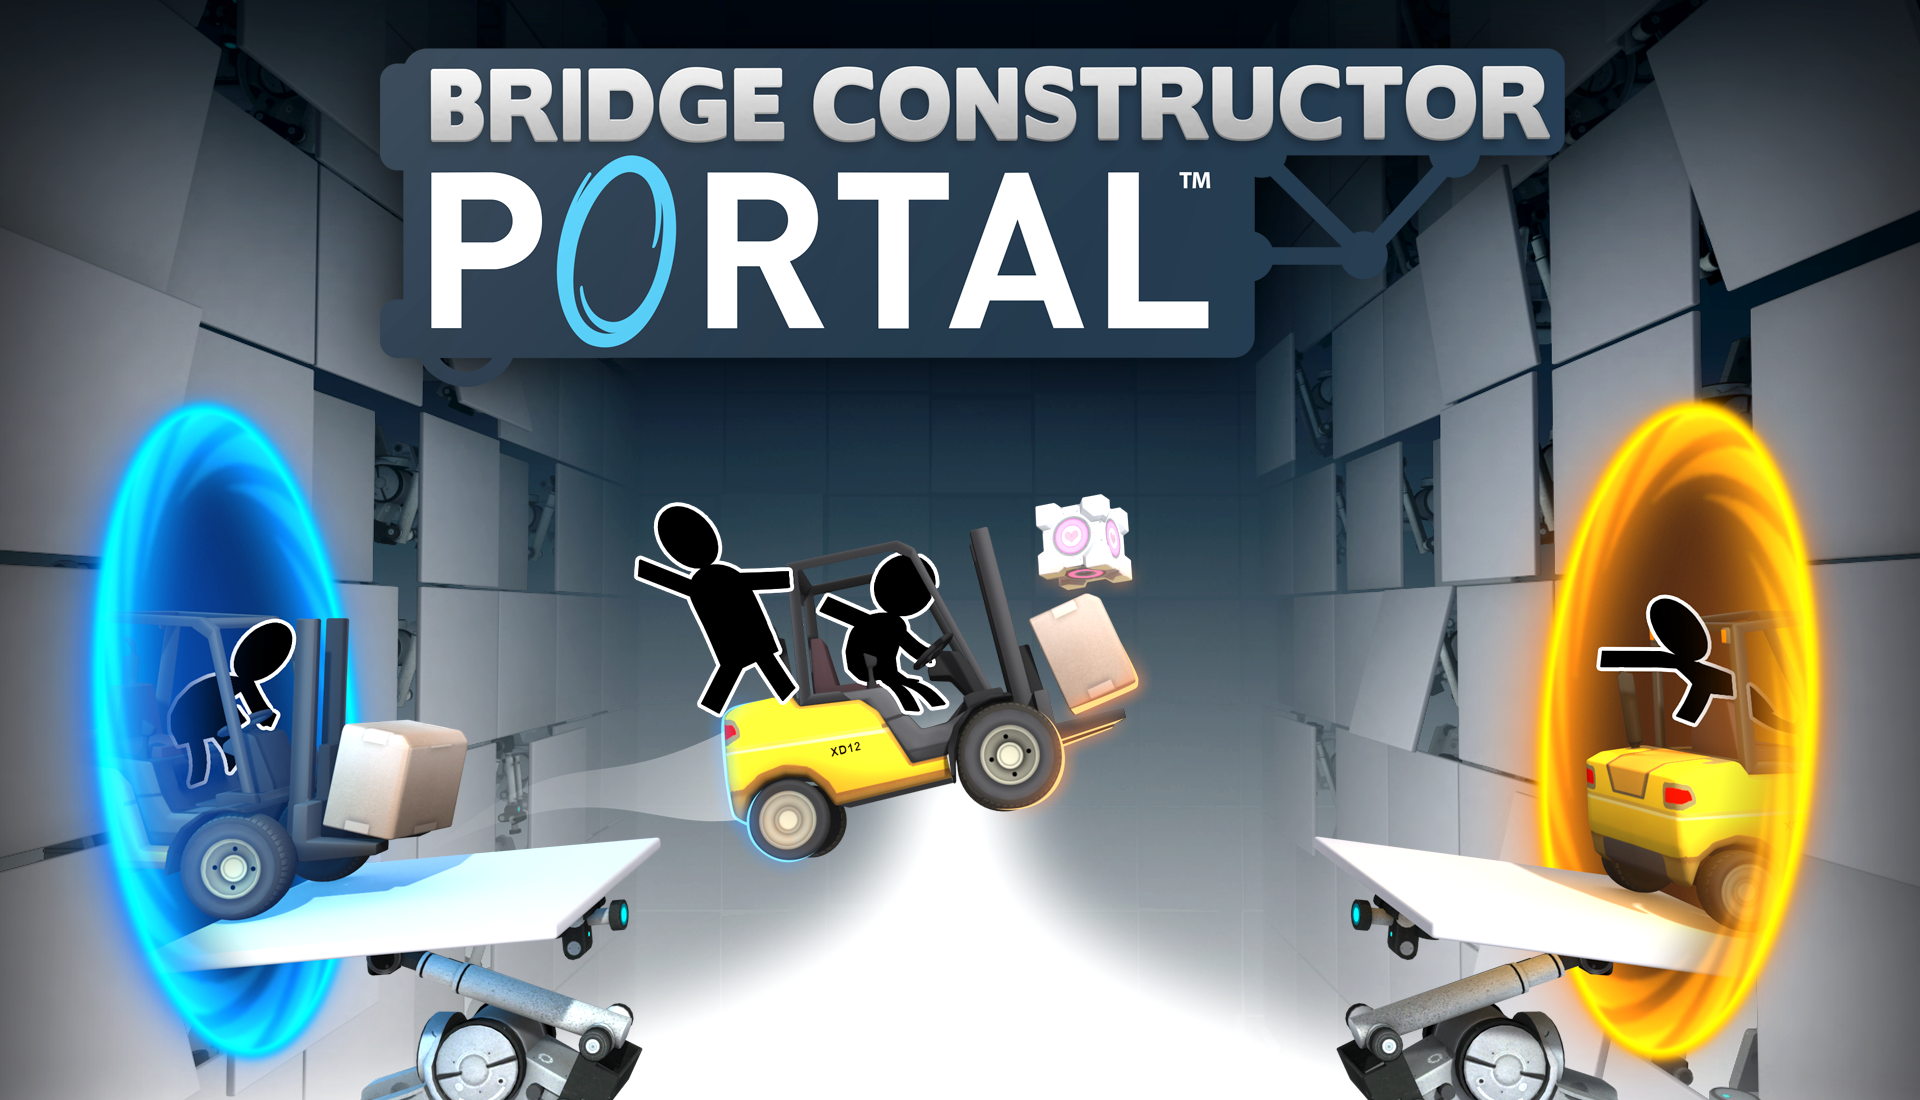 Bridge Constructor Portal Switch, Xbox One and PS4 Editions Arriving in 3 Weeks